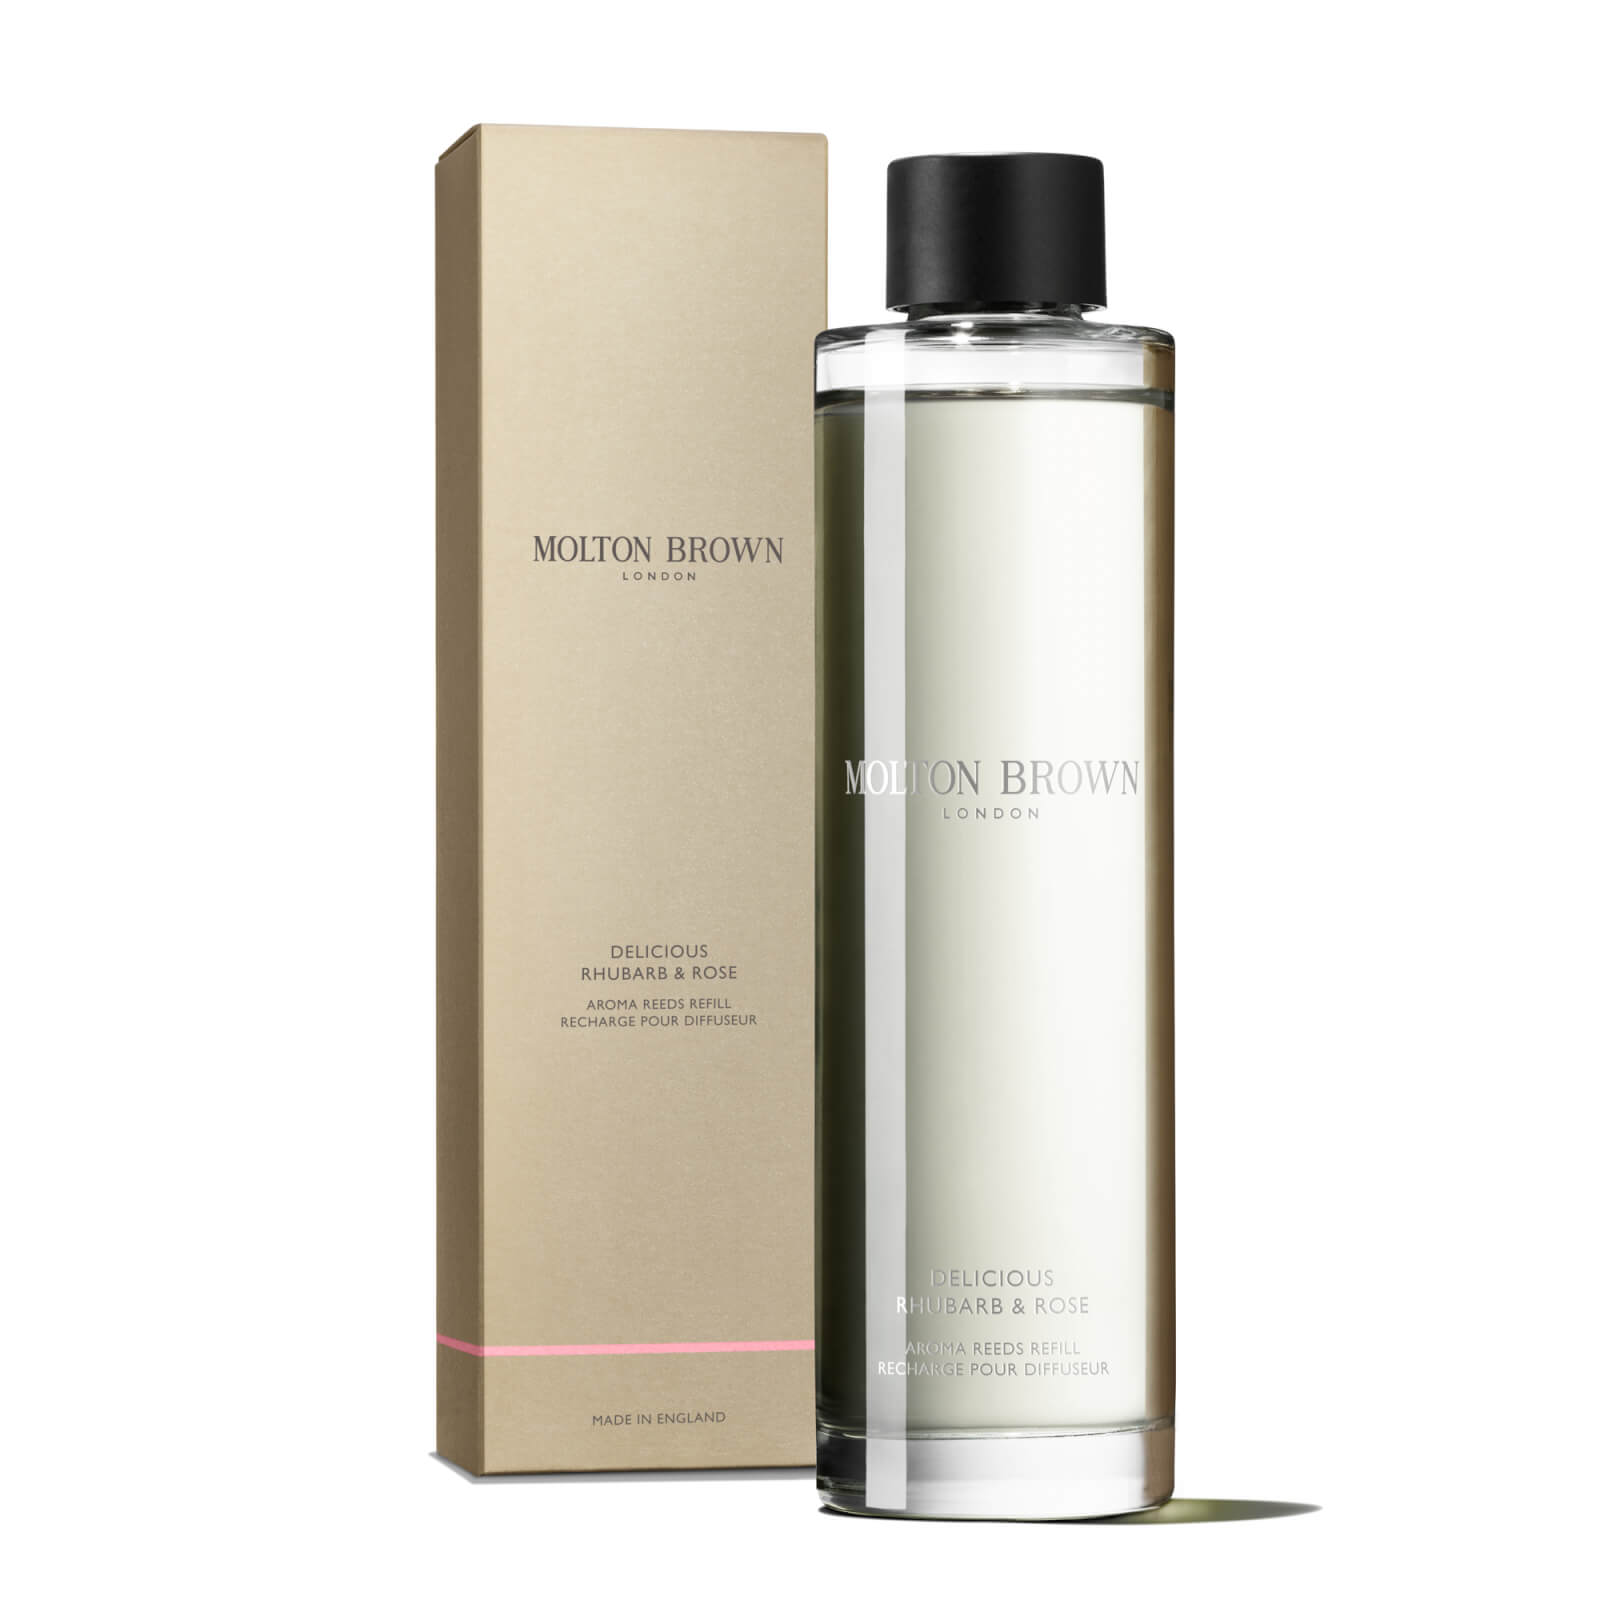 MOLTON BROWN MOLTON BROWN DELICIOUS RHUBARB AND ROSE AROMA REEDS REFILL 150ML